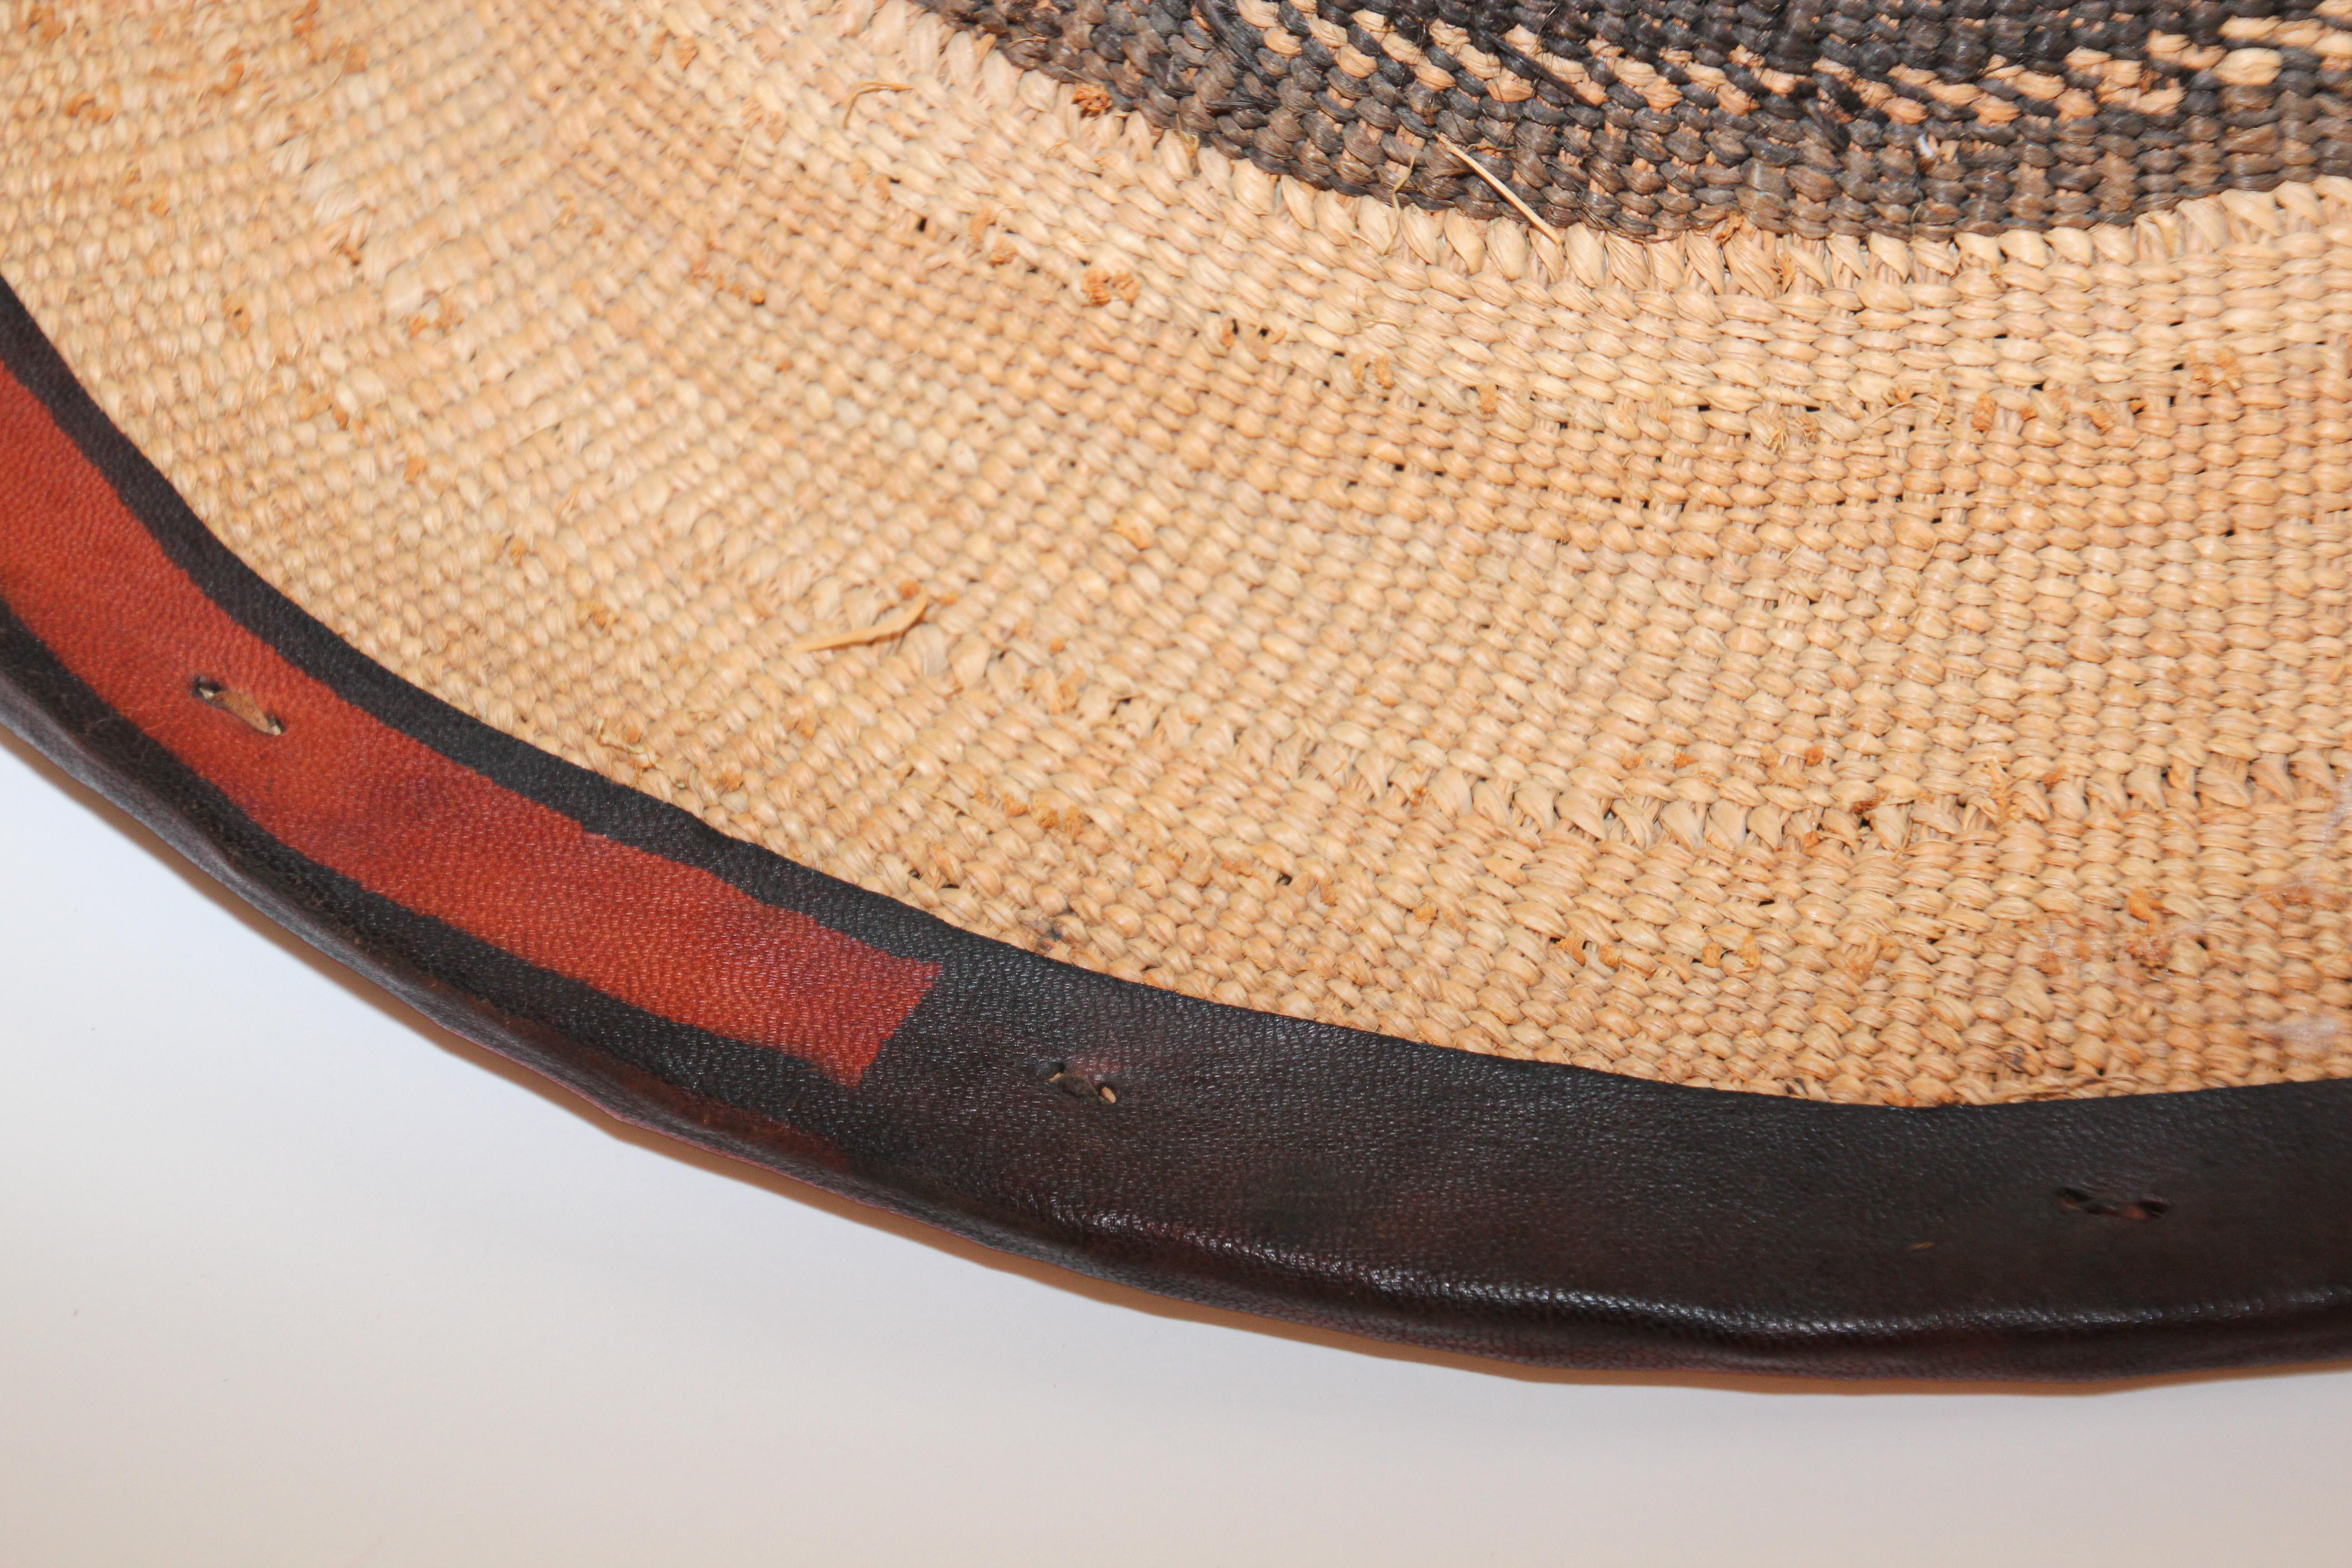 Mali West Africa Conical Leather and Straw Tribal Fulani Hat 4